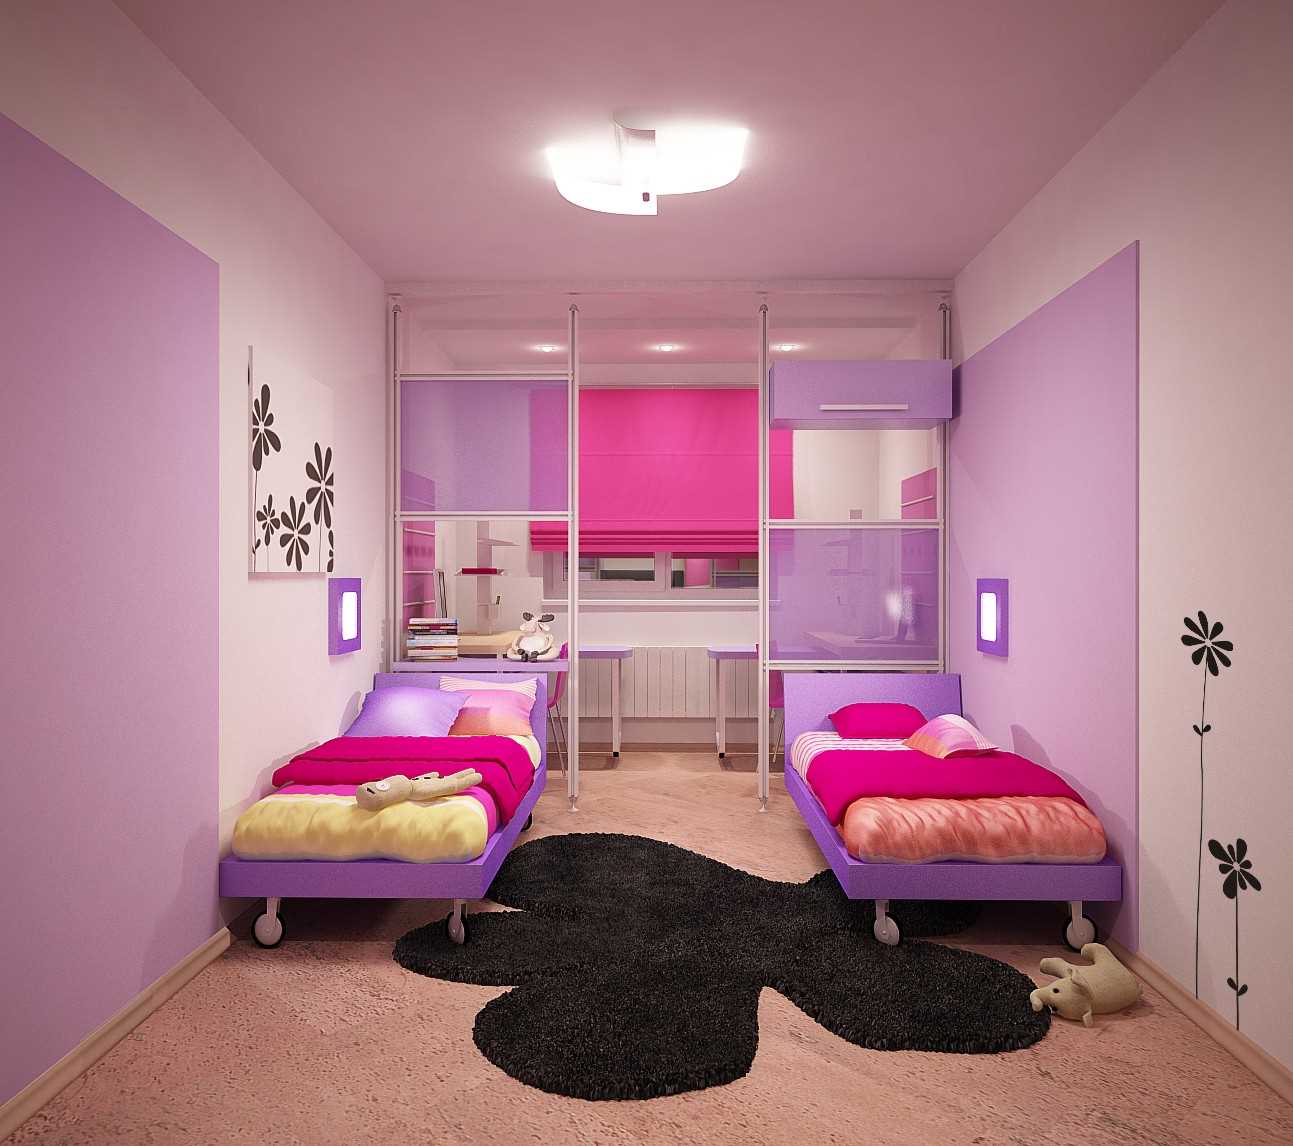 An example of a bright design of a children's room for two girls